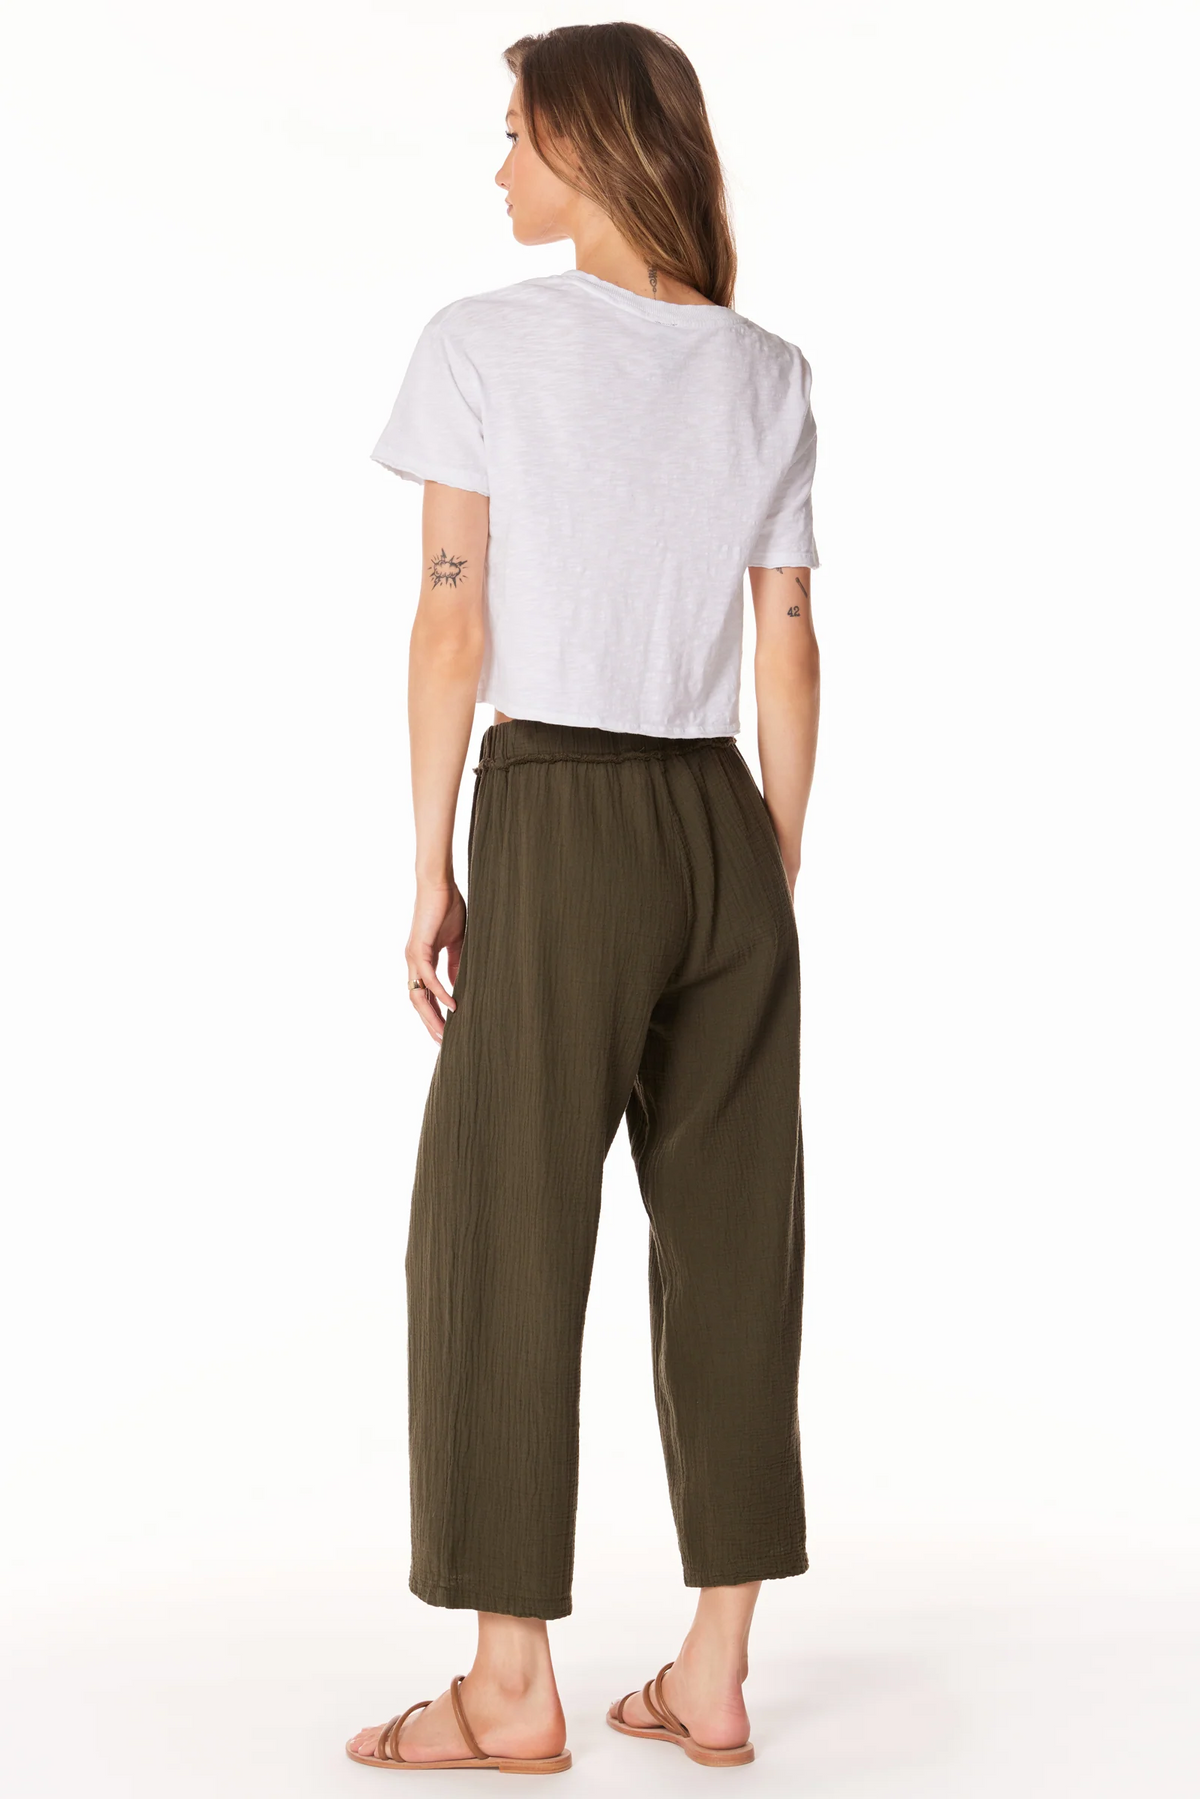 Bobi Crop Wide Leg Pant in Troops - Size S Available